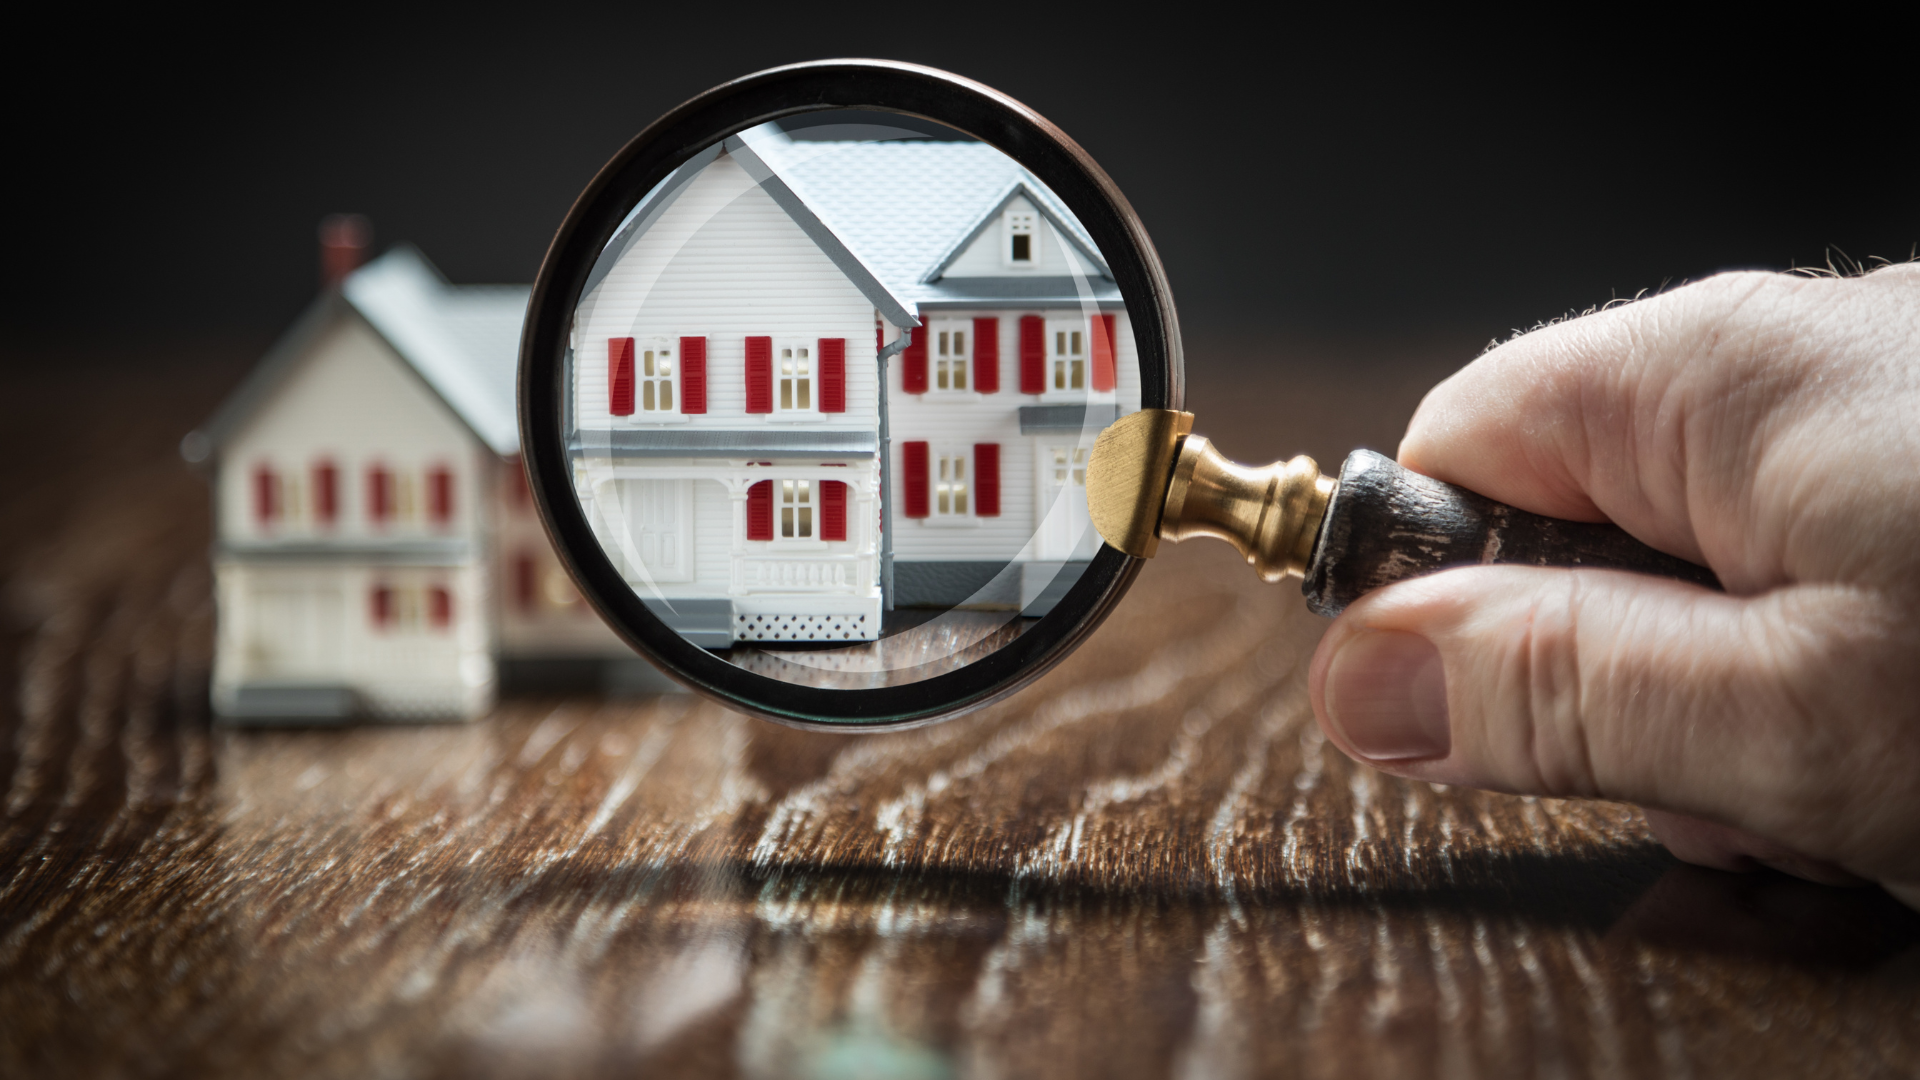 A person using a magnifying glass to examine a model house and mortgage documents, representing the scrutiny and understanding required for mortgage product transfers.